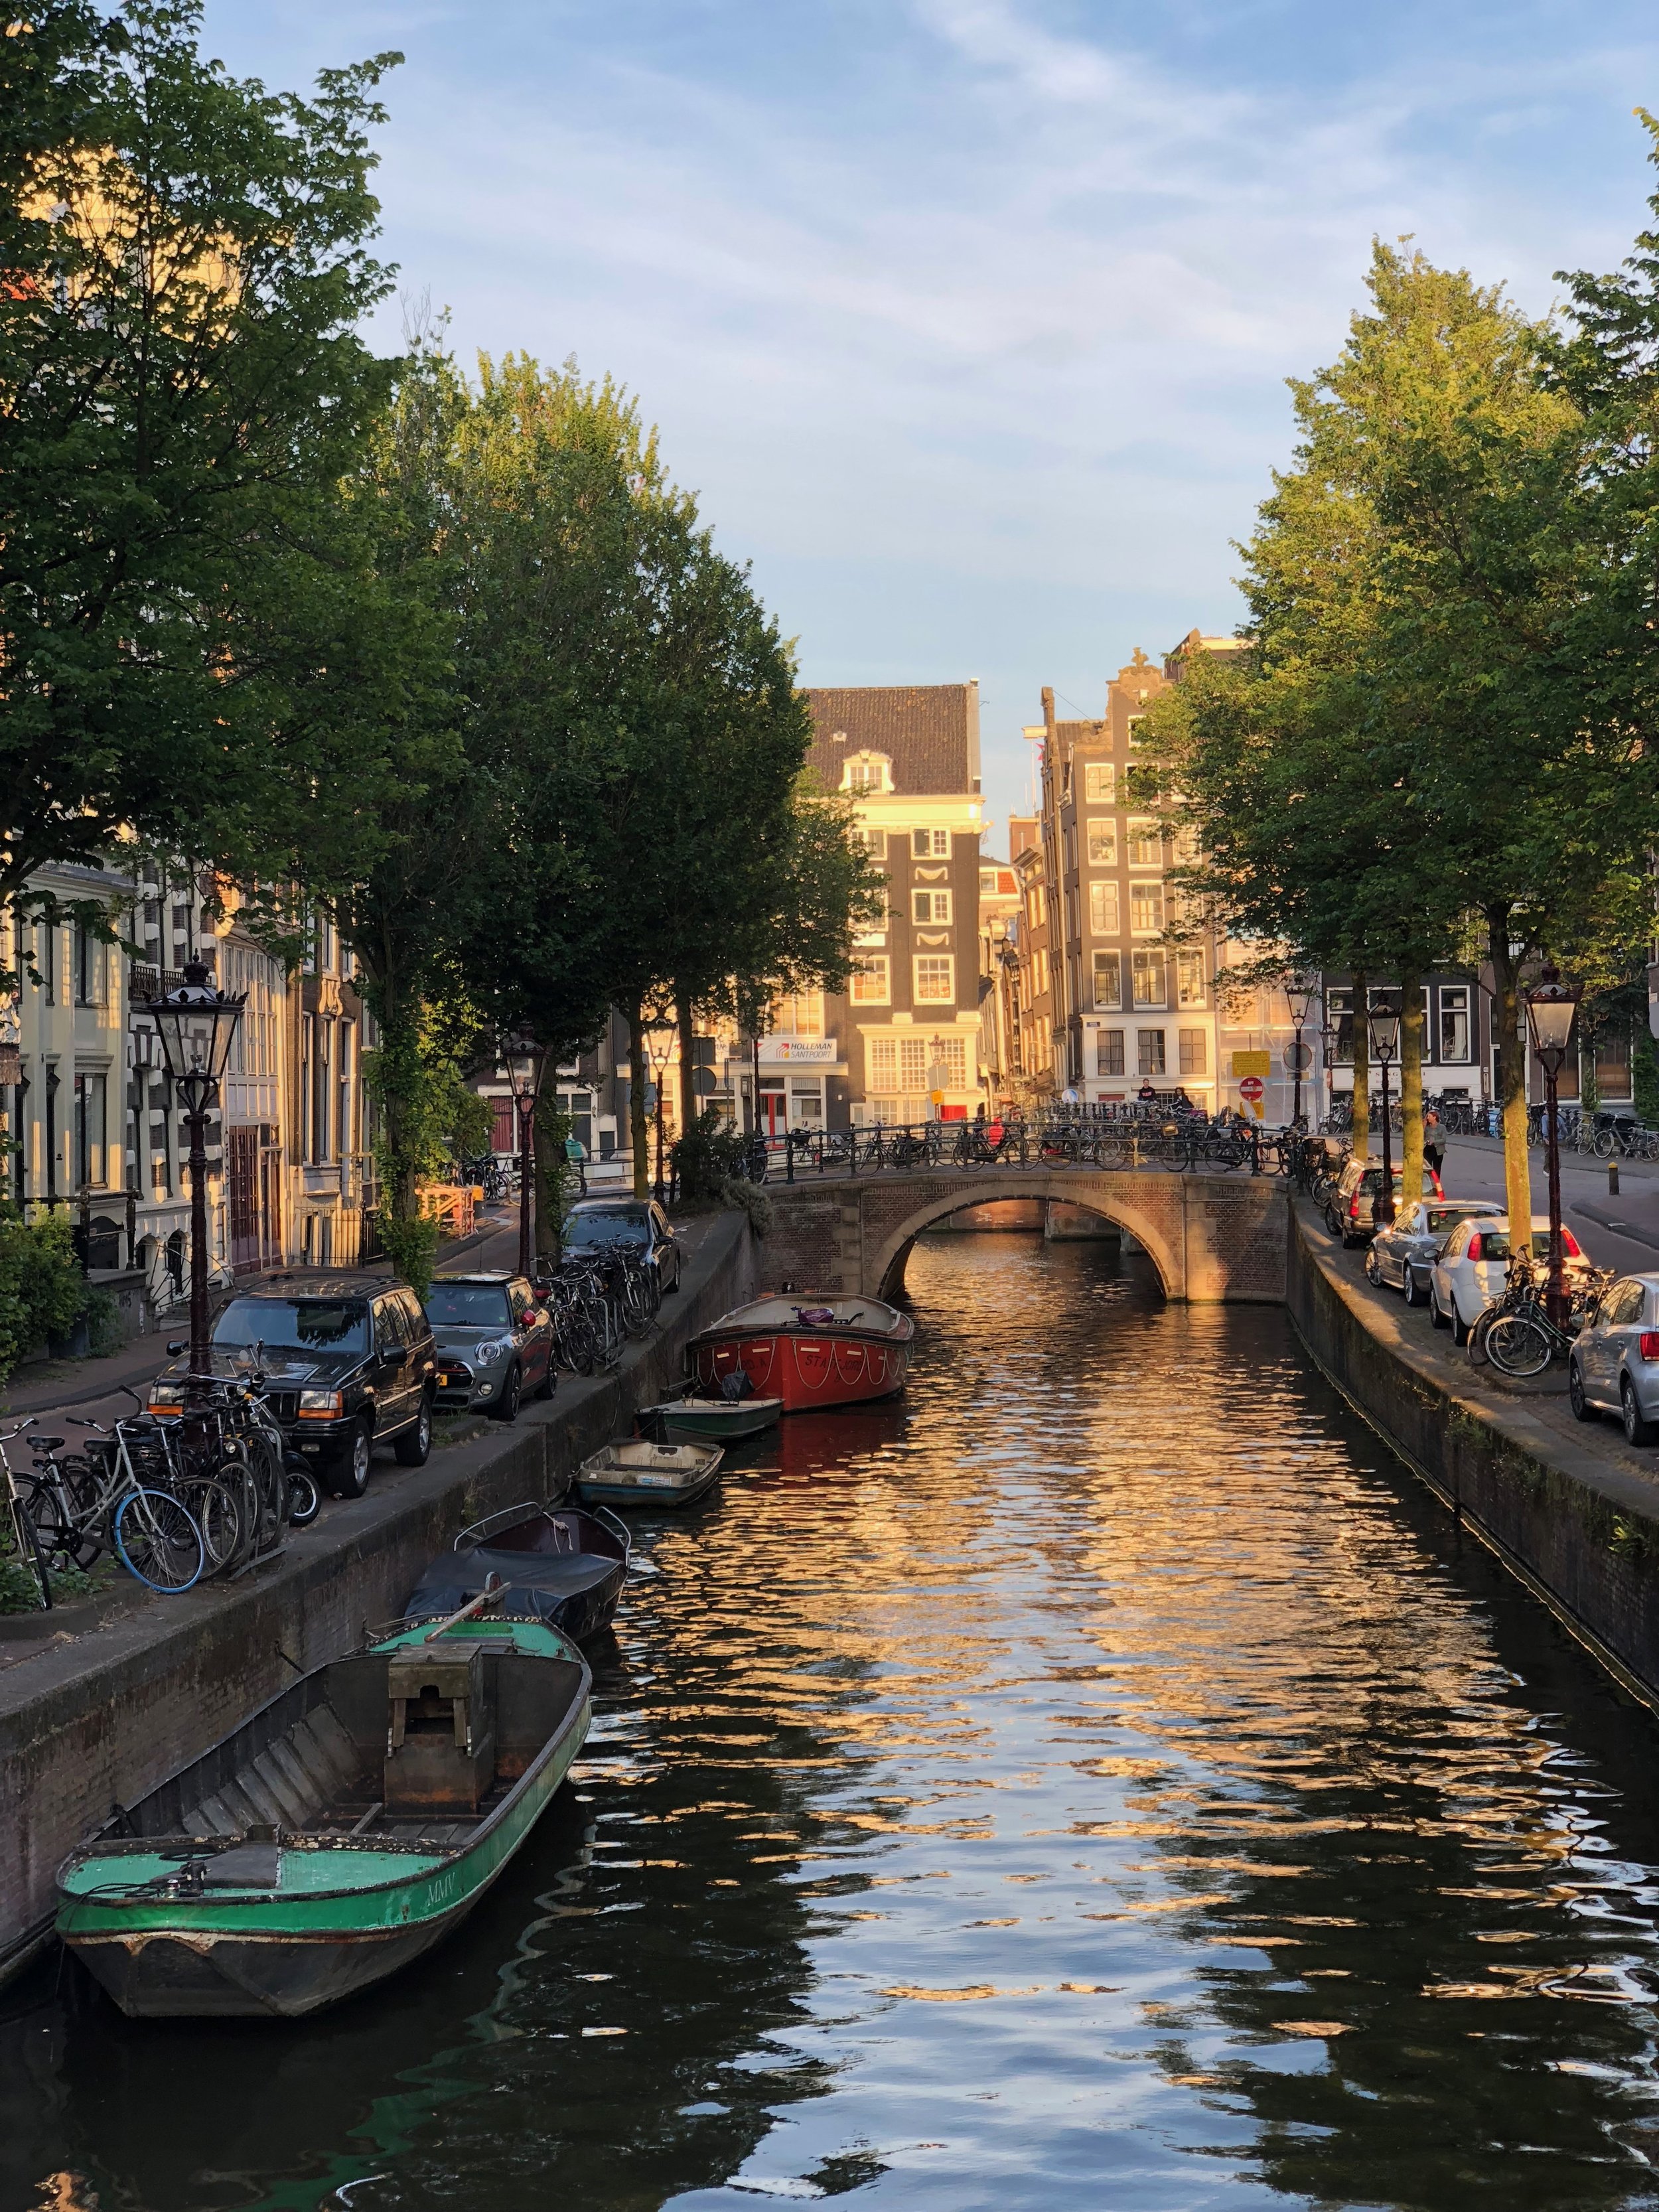 The golden hour in Amsterdam